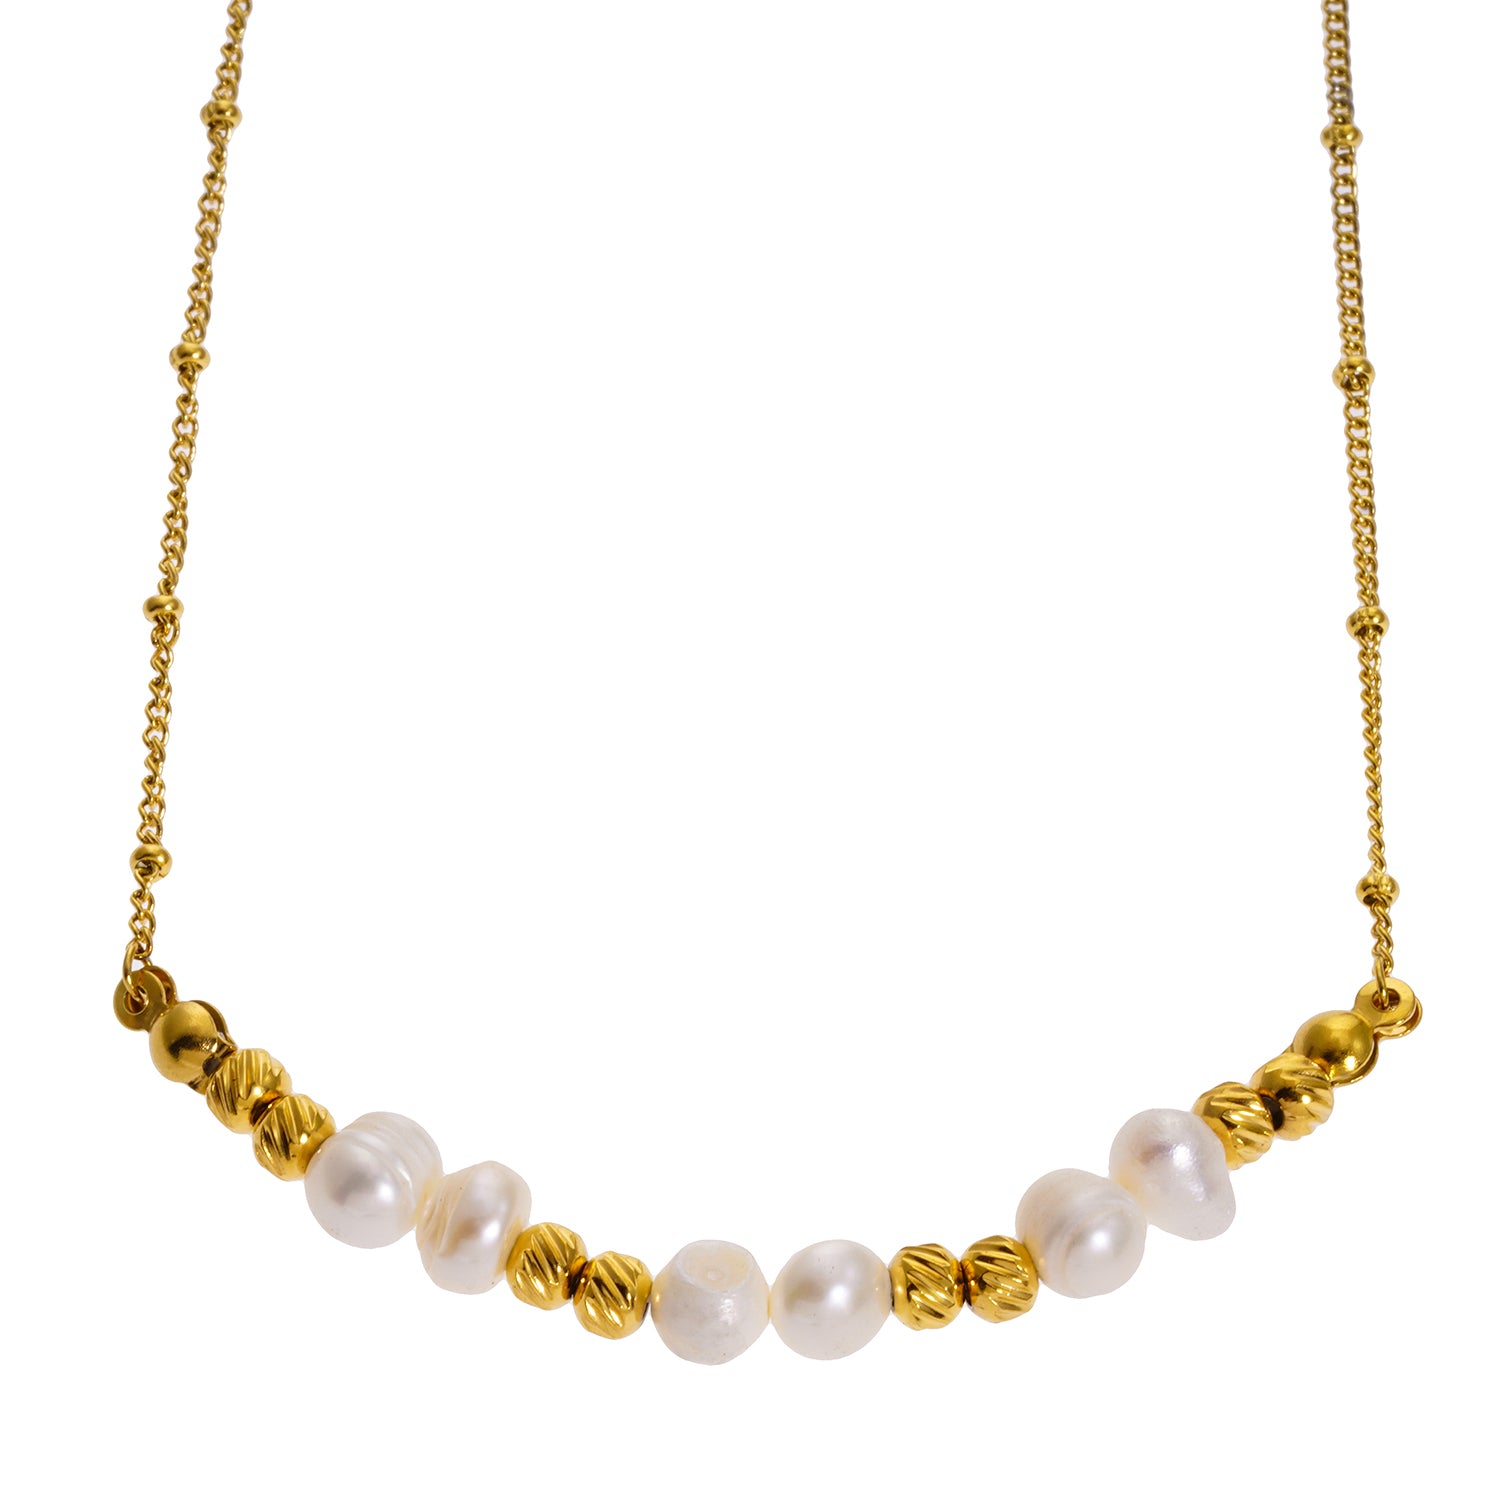 Style VILJA 3223: Gilded Harmony Chain Necklace with Gold Beads and Freshwater Pearls.